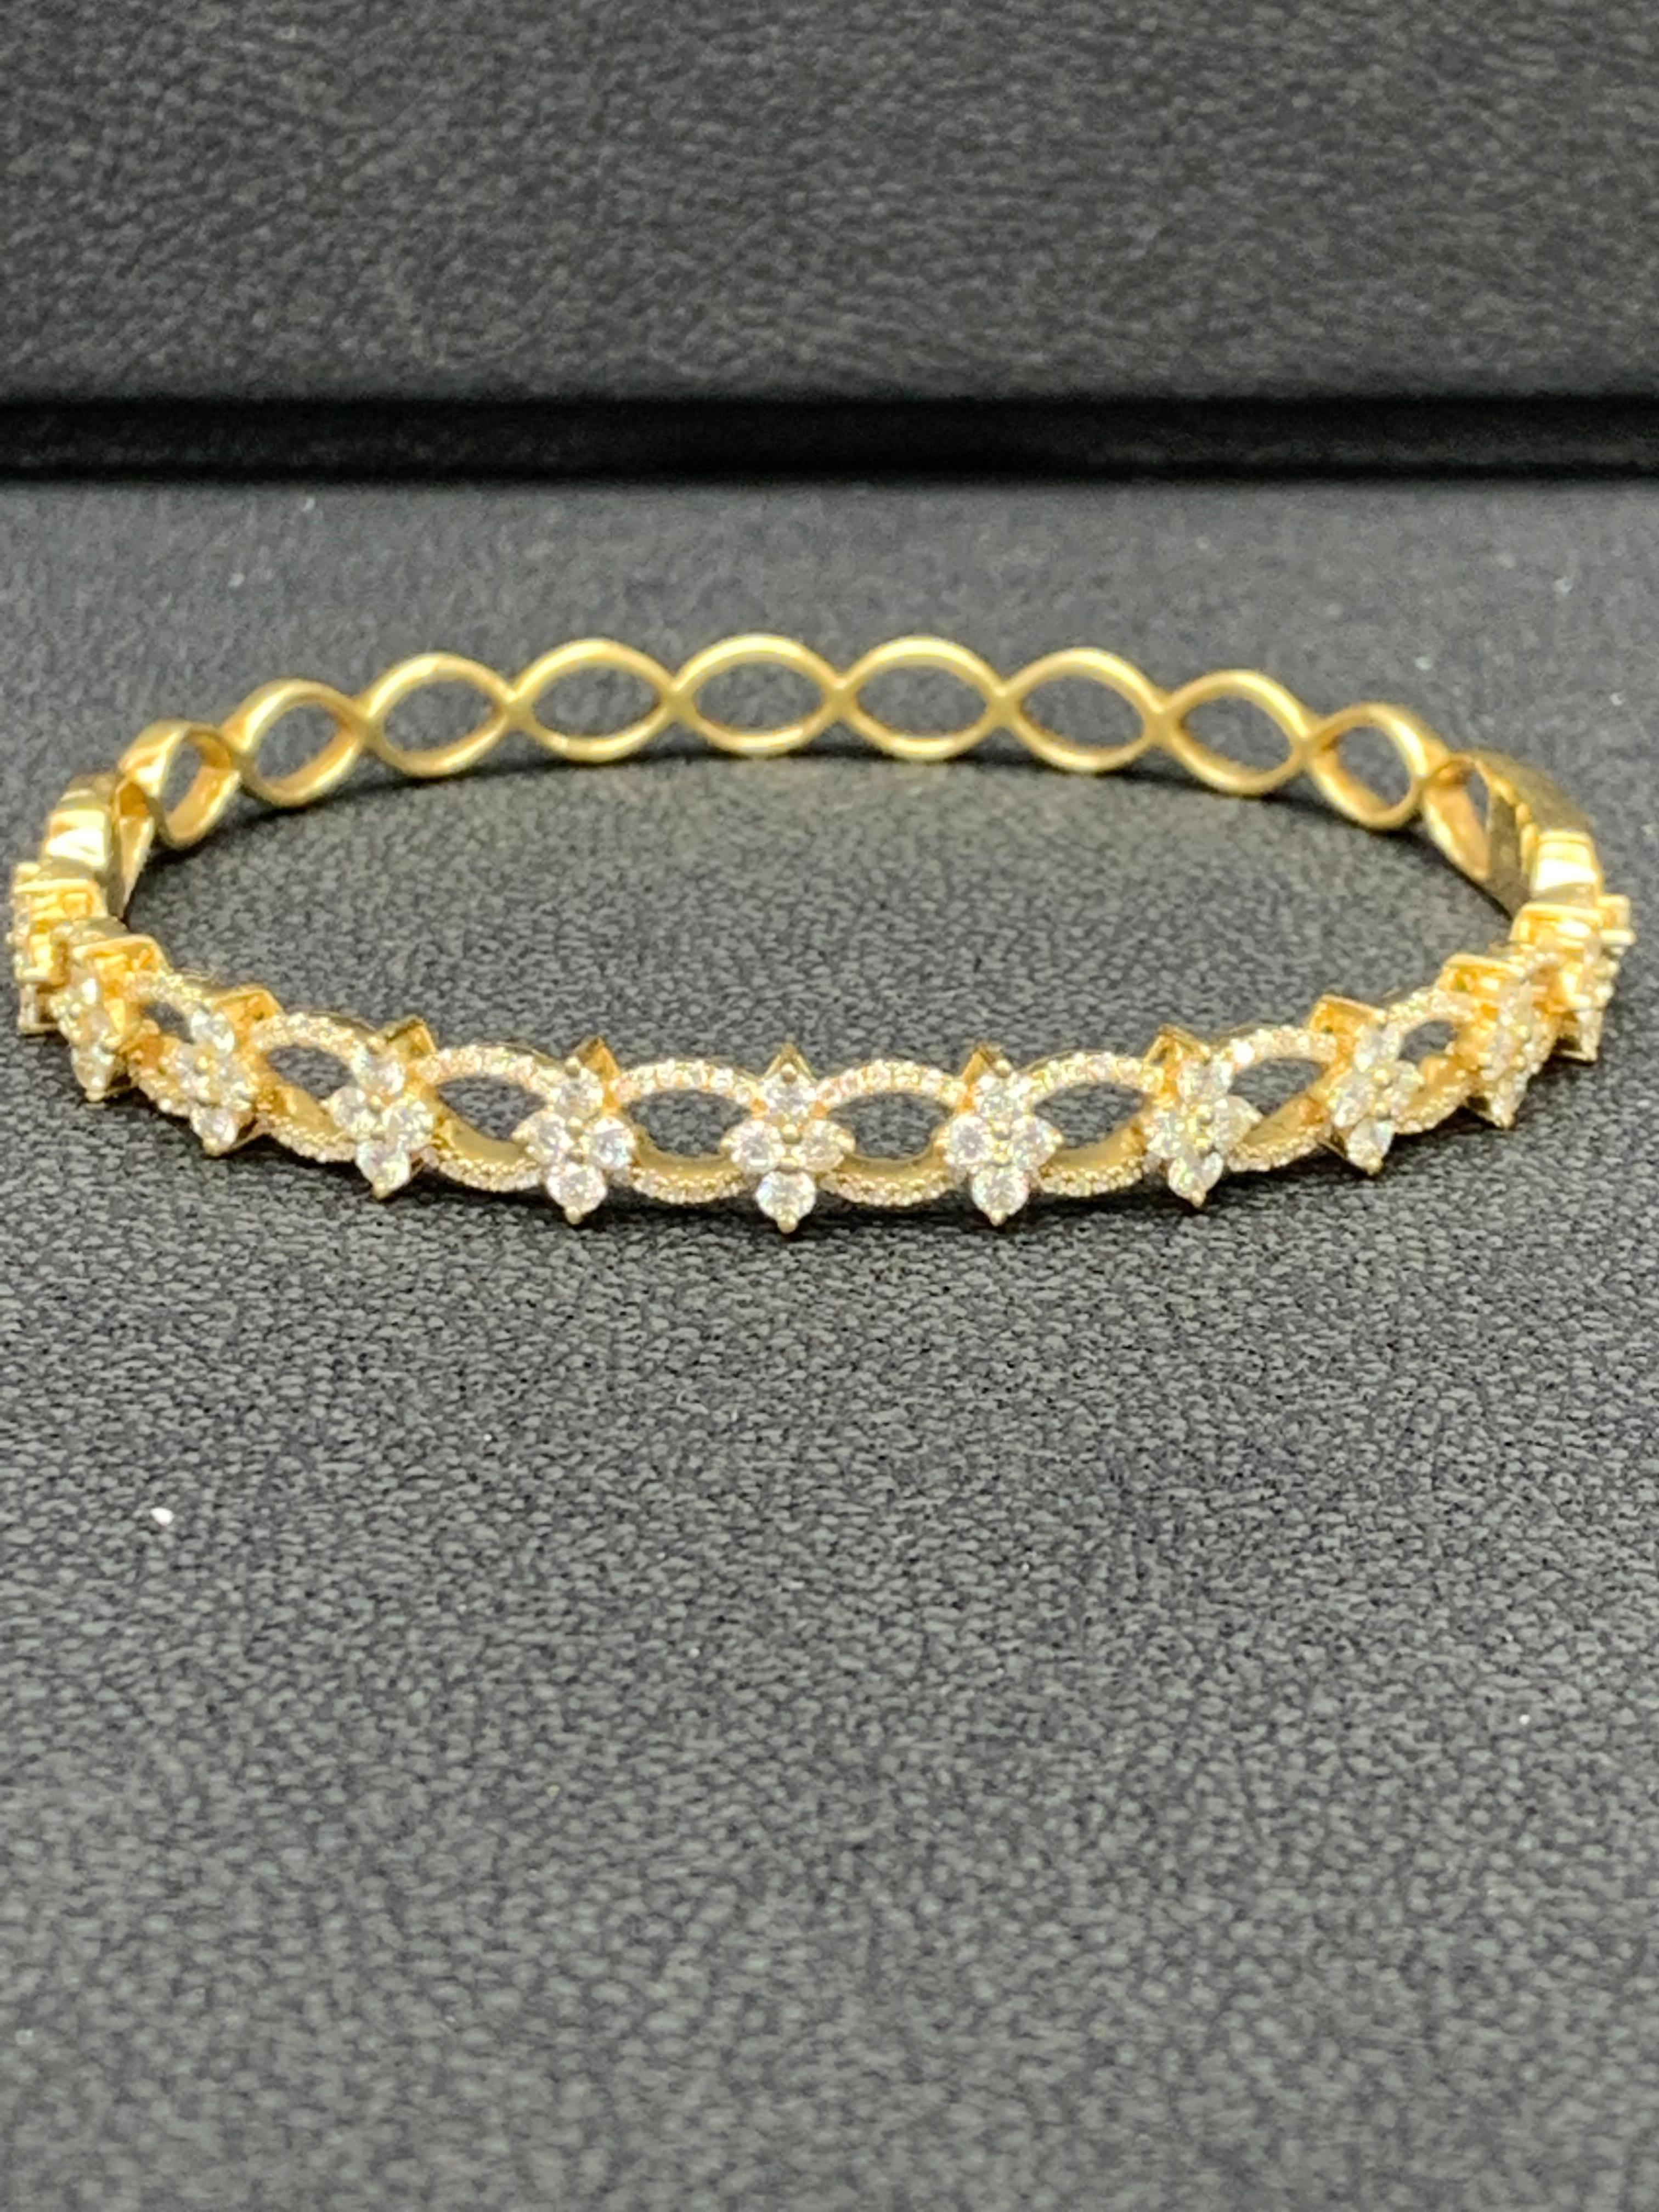 A beautiful and important bangle showcasing 2.00 carats of round brilliant diamonds big and small both, set in an intricately-designed open-work setting made in 18k yellow gold.

Style available in different price ranges. Prices are based on your